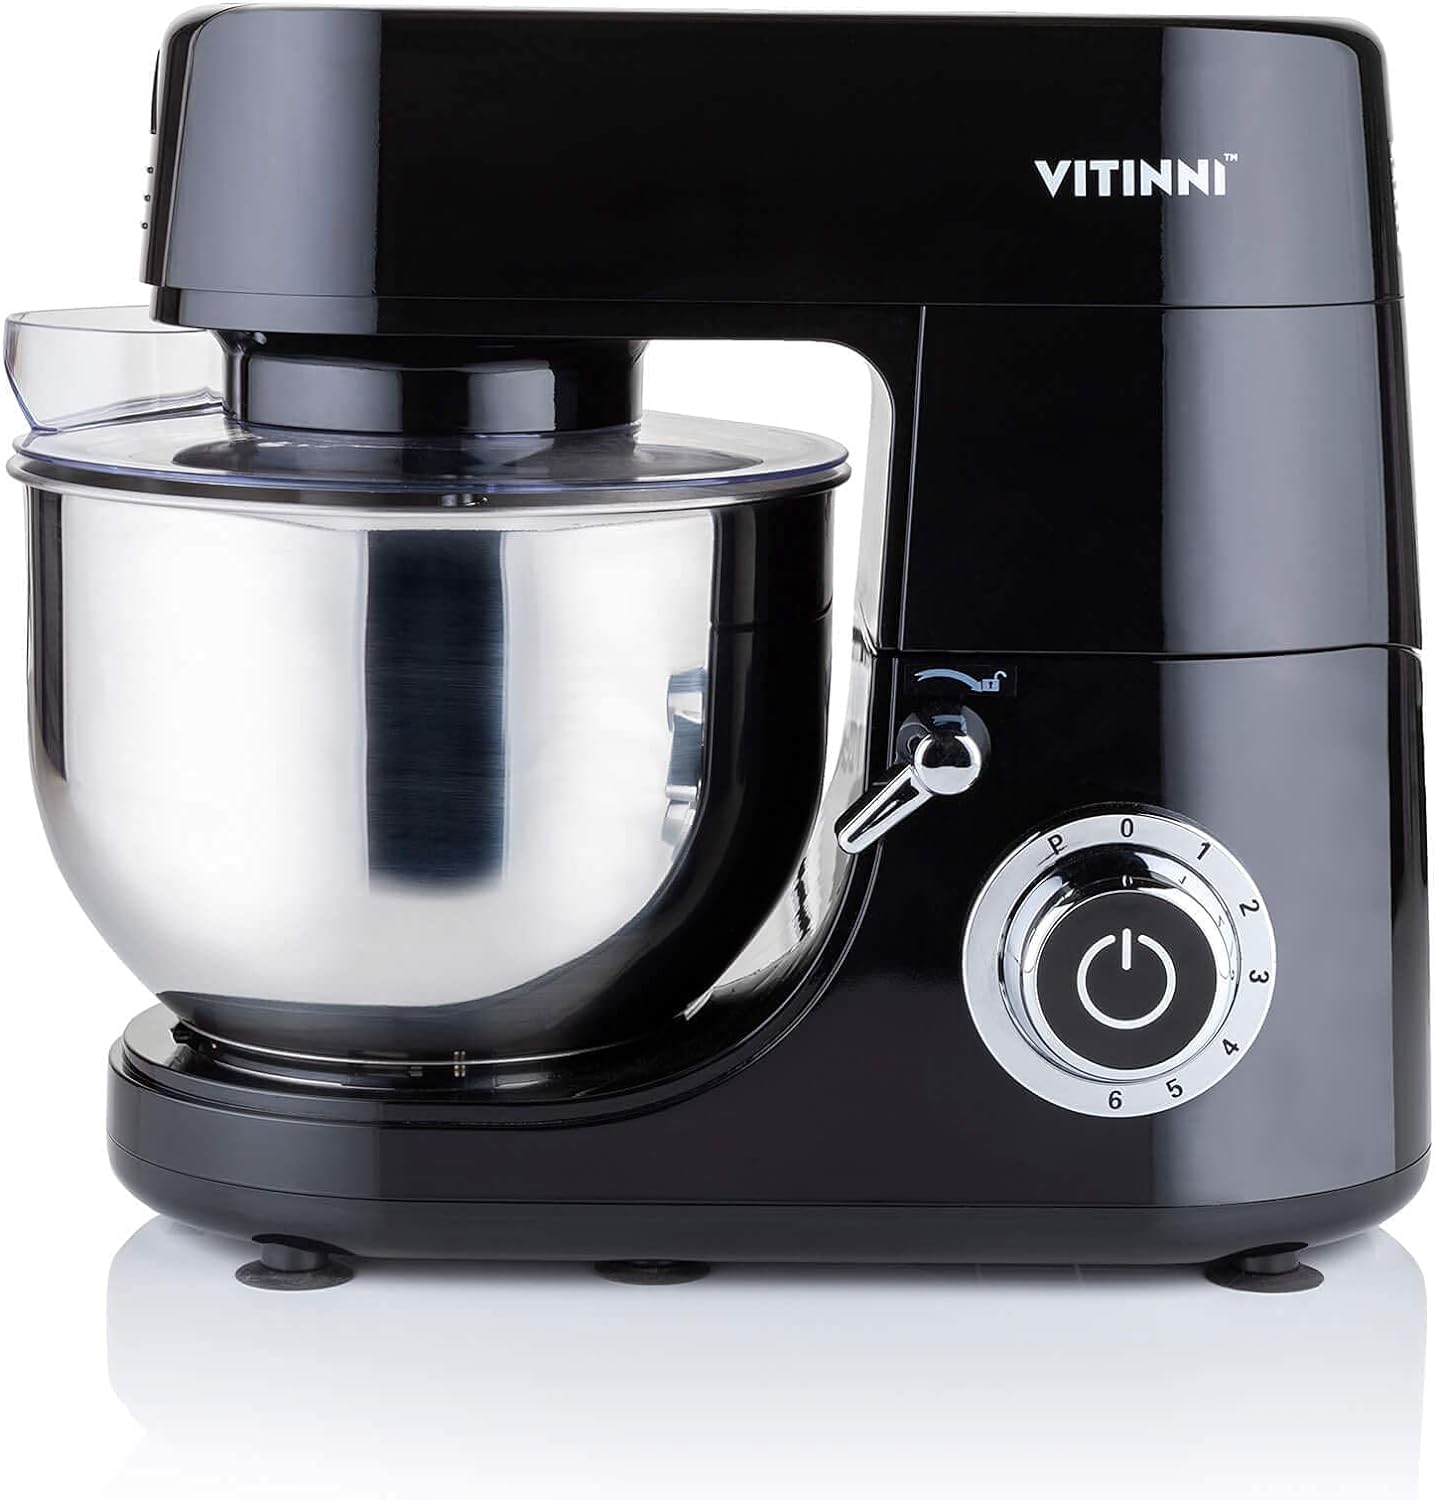 Vitinni Stand Mixer – Powerful 1500W Baking Mixer, 6L Stainless Steel Bowl, Digital Timer 6 Speed Control, 3 Multipurpose Attachments Included, Whisk, Flat Beater & Dough Hook, Splash Guard, Black - Amazing Gadgets Outlet